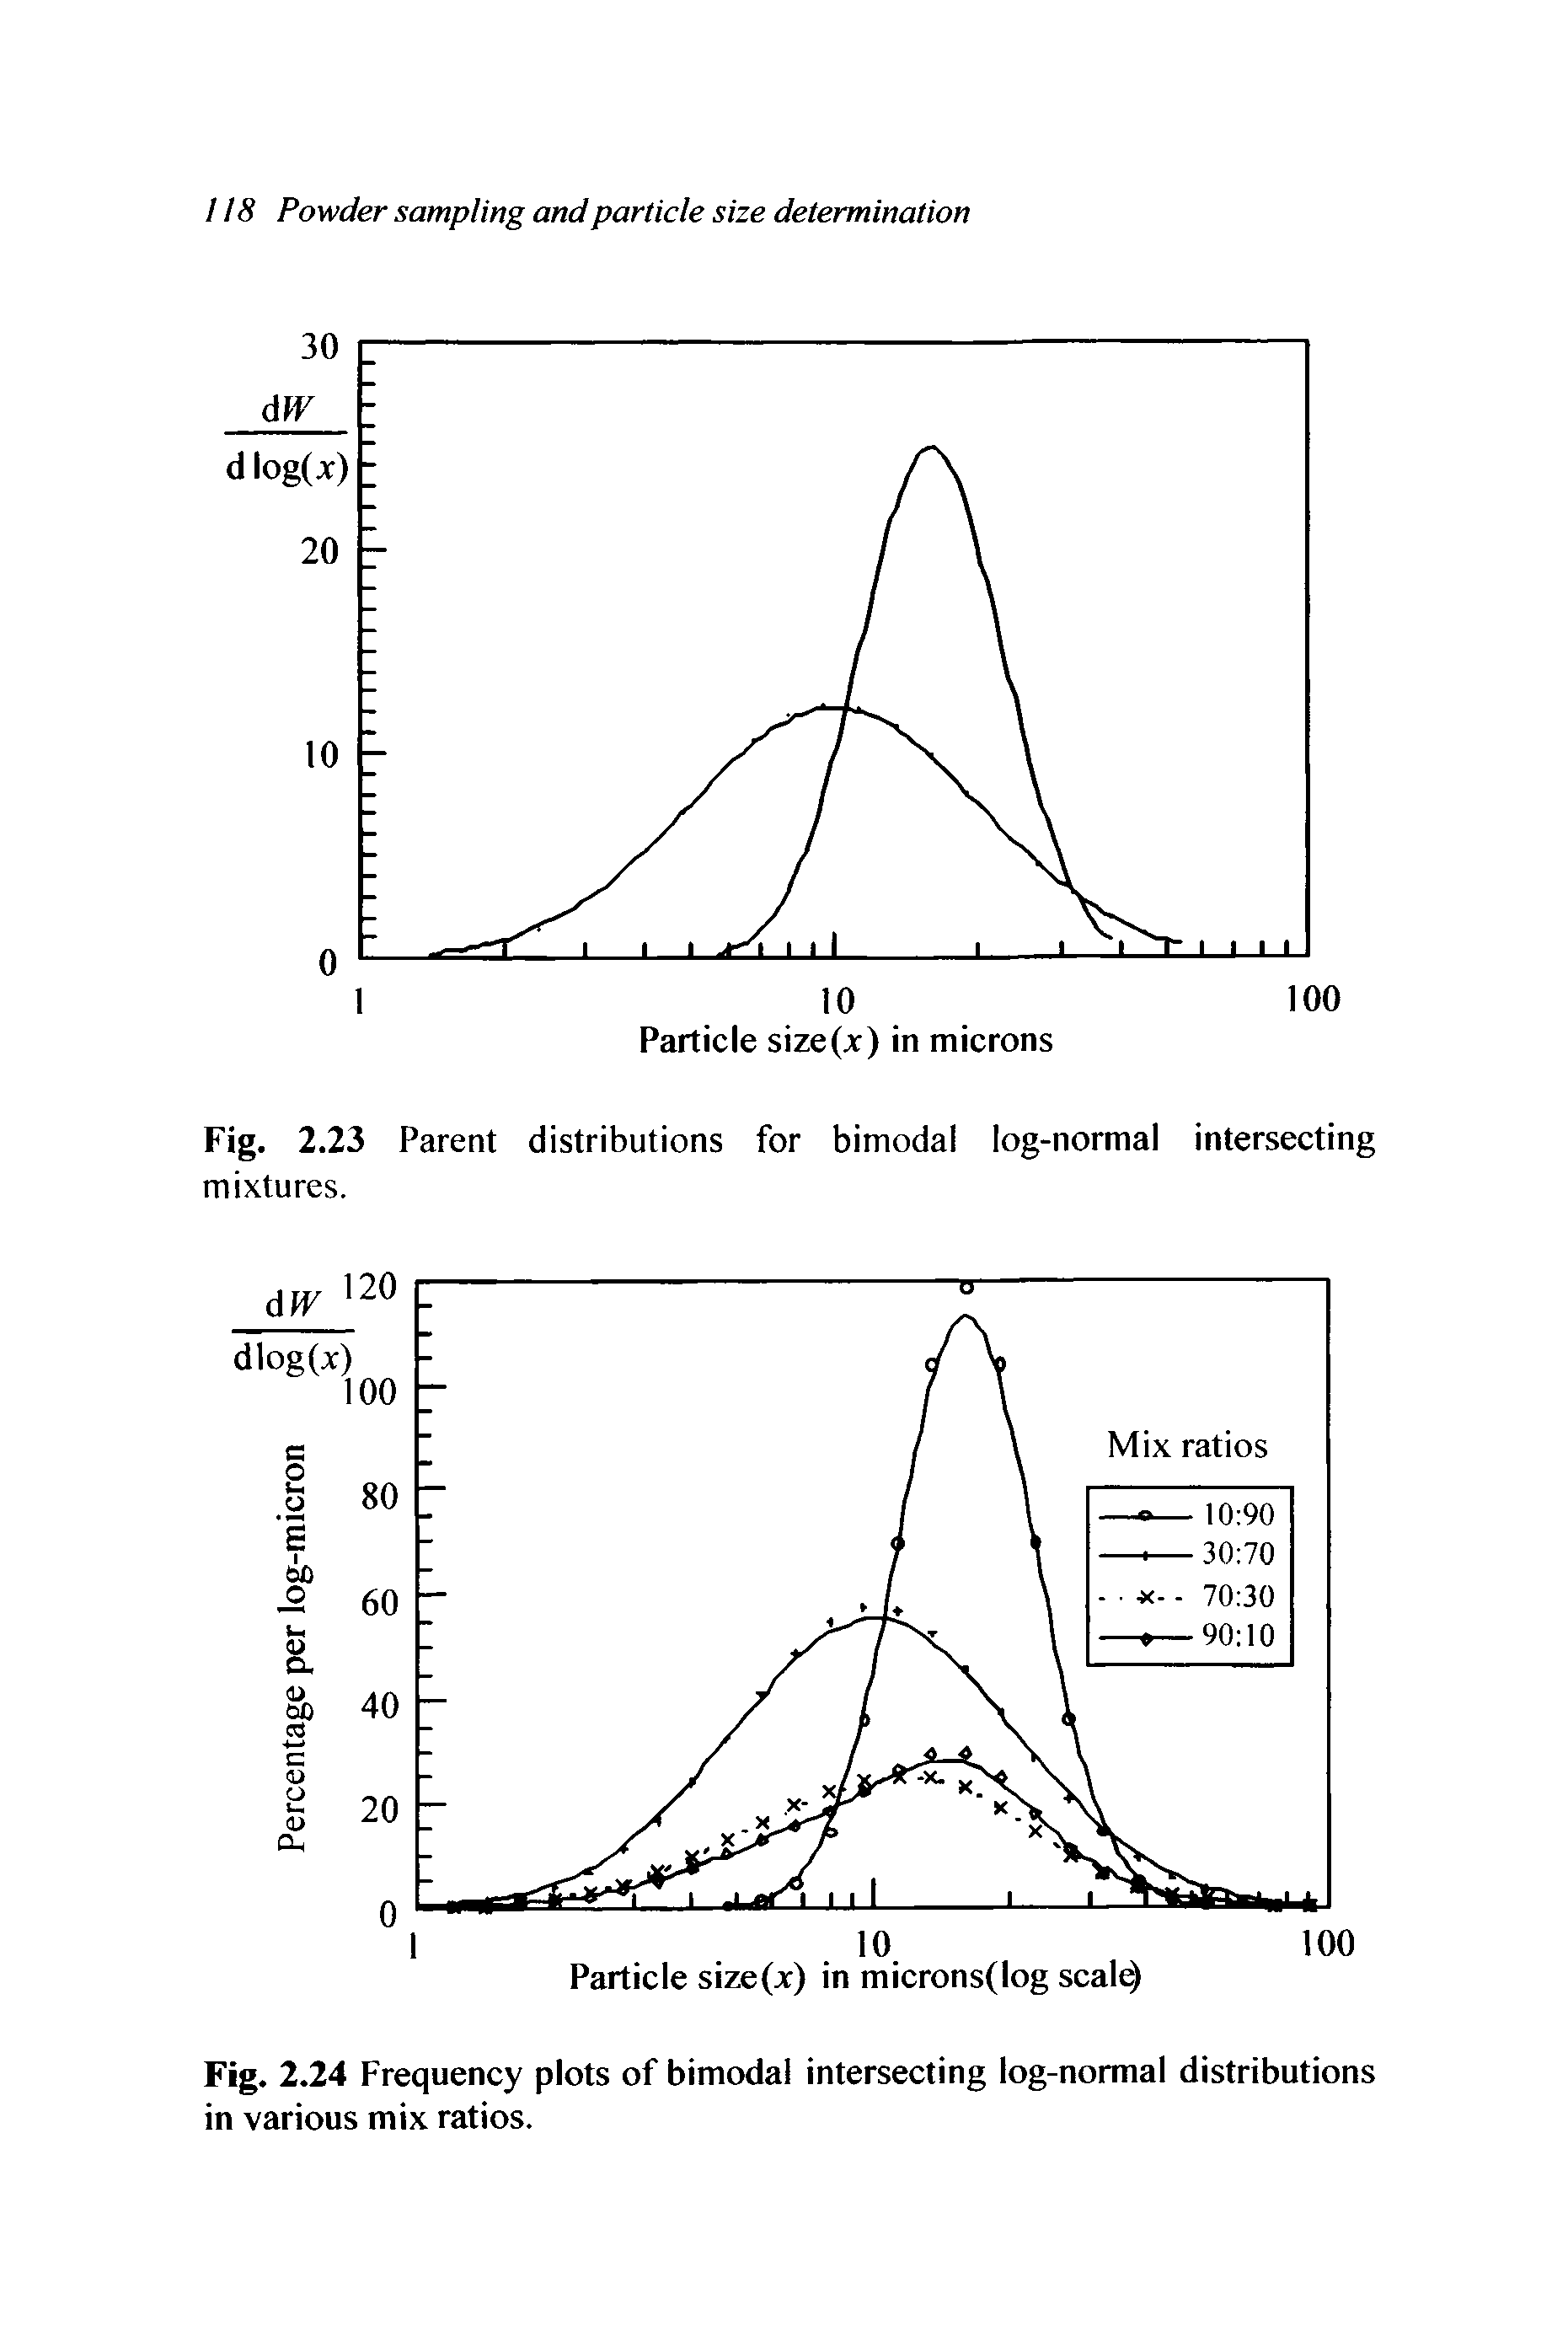 Fig. 2.23 Parent distributions for bimodal log-normal intersecting mixtures.